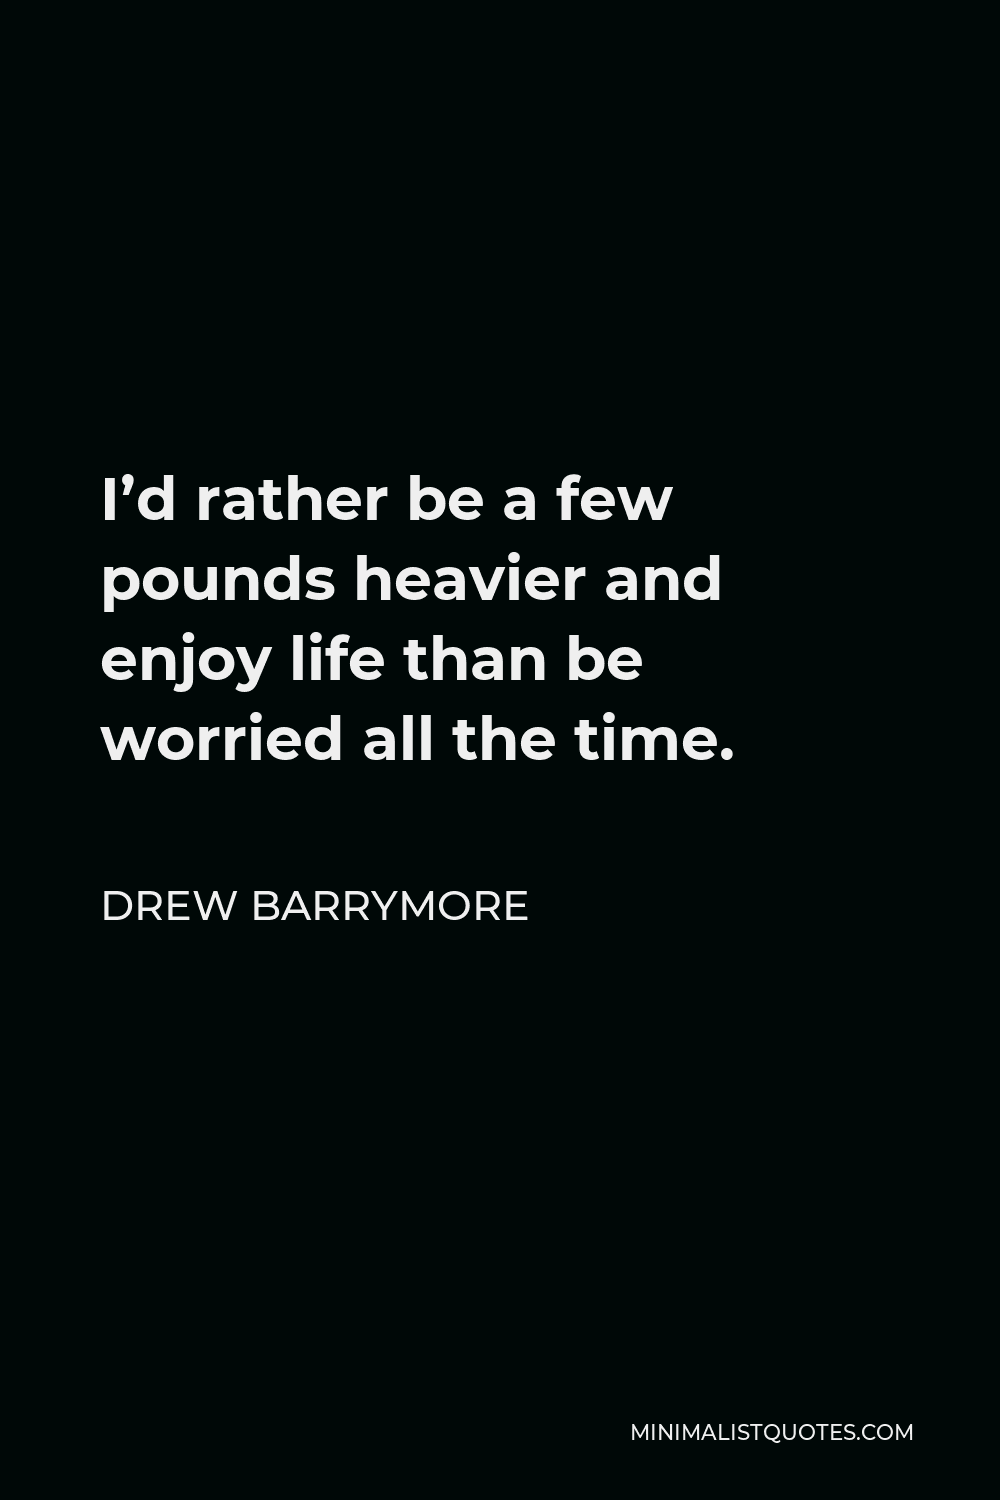 Drew Barrymore Quote - I’d rather be a few pounds heavier and enjoy life than be worried all the time.